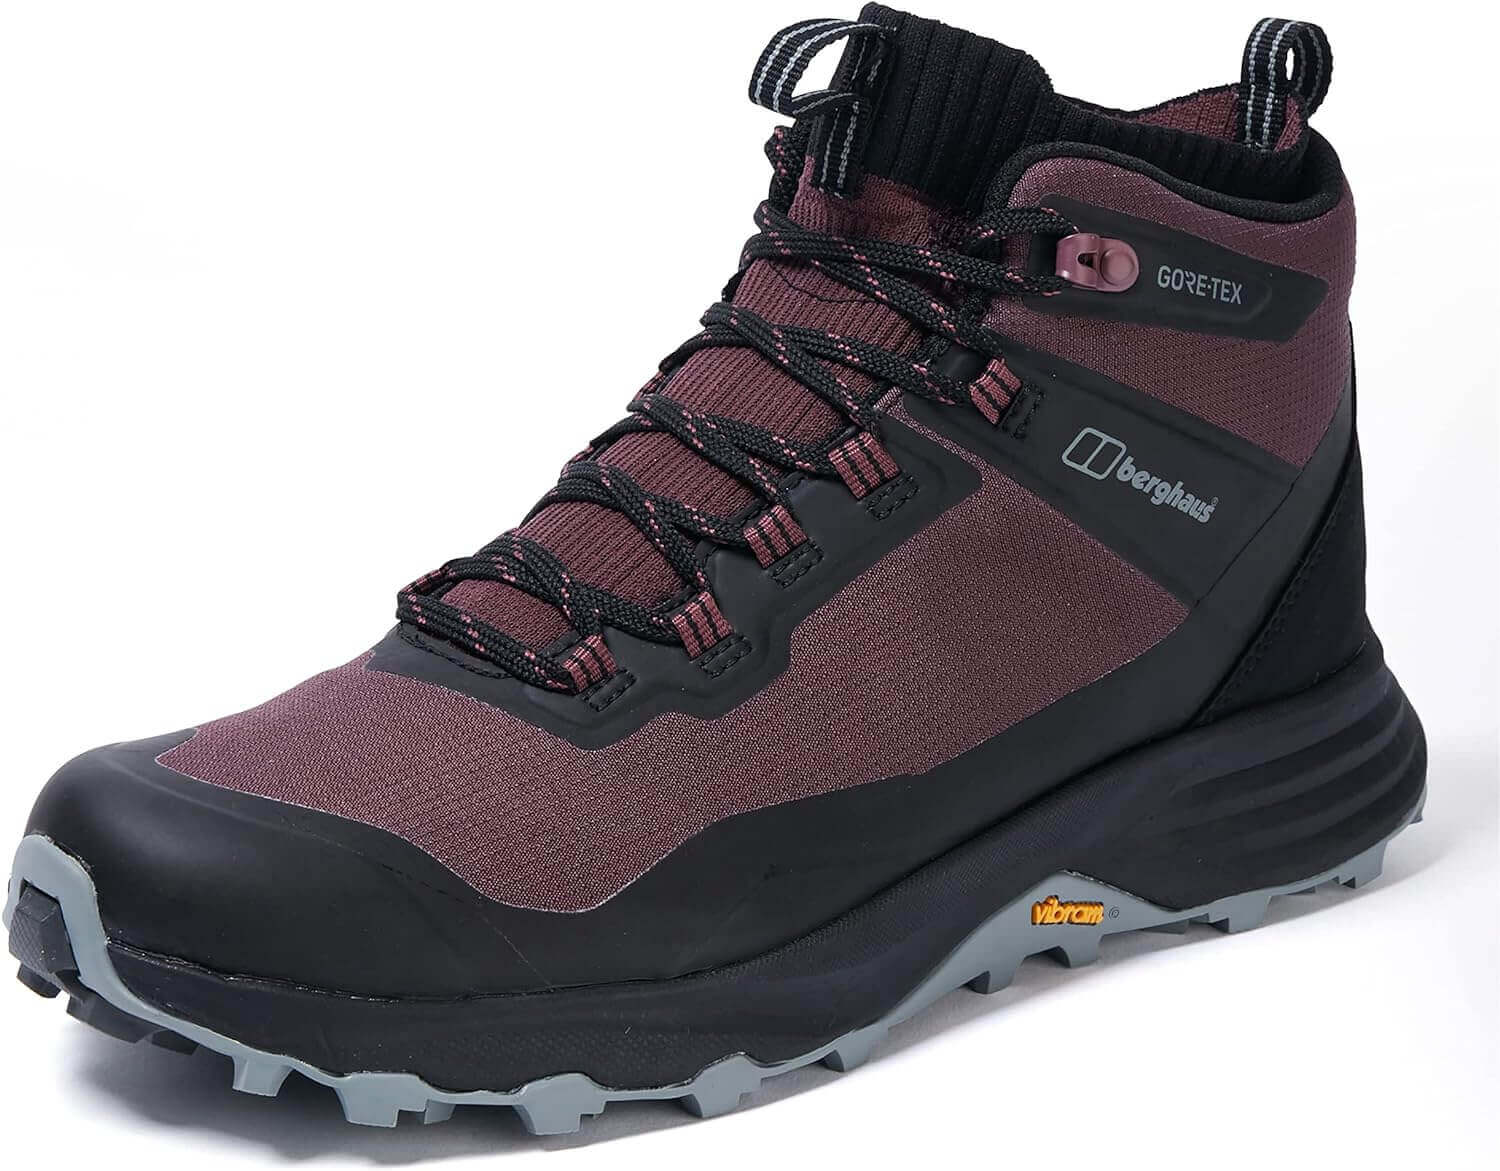 Shop The Latest >Berghaus VC22 Mid Gore-Tex Women's Outdoor Walking Boot > *Only $175.51*> From The Top Brand > *Berghausl* > Shop Now and Get Free Shipping On Orders Over $45.00 >*Shop Earth Foot*